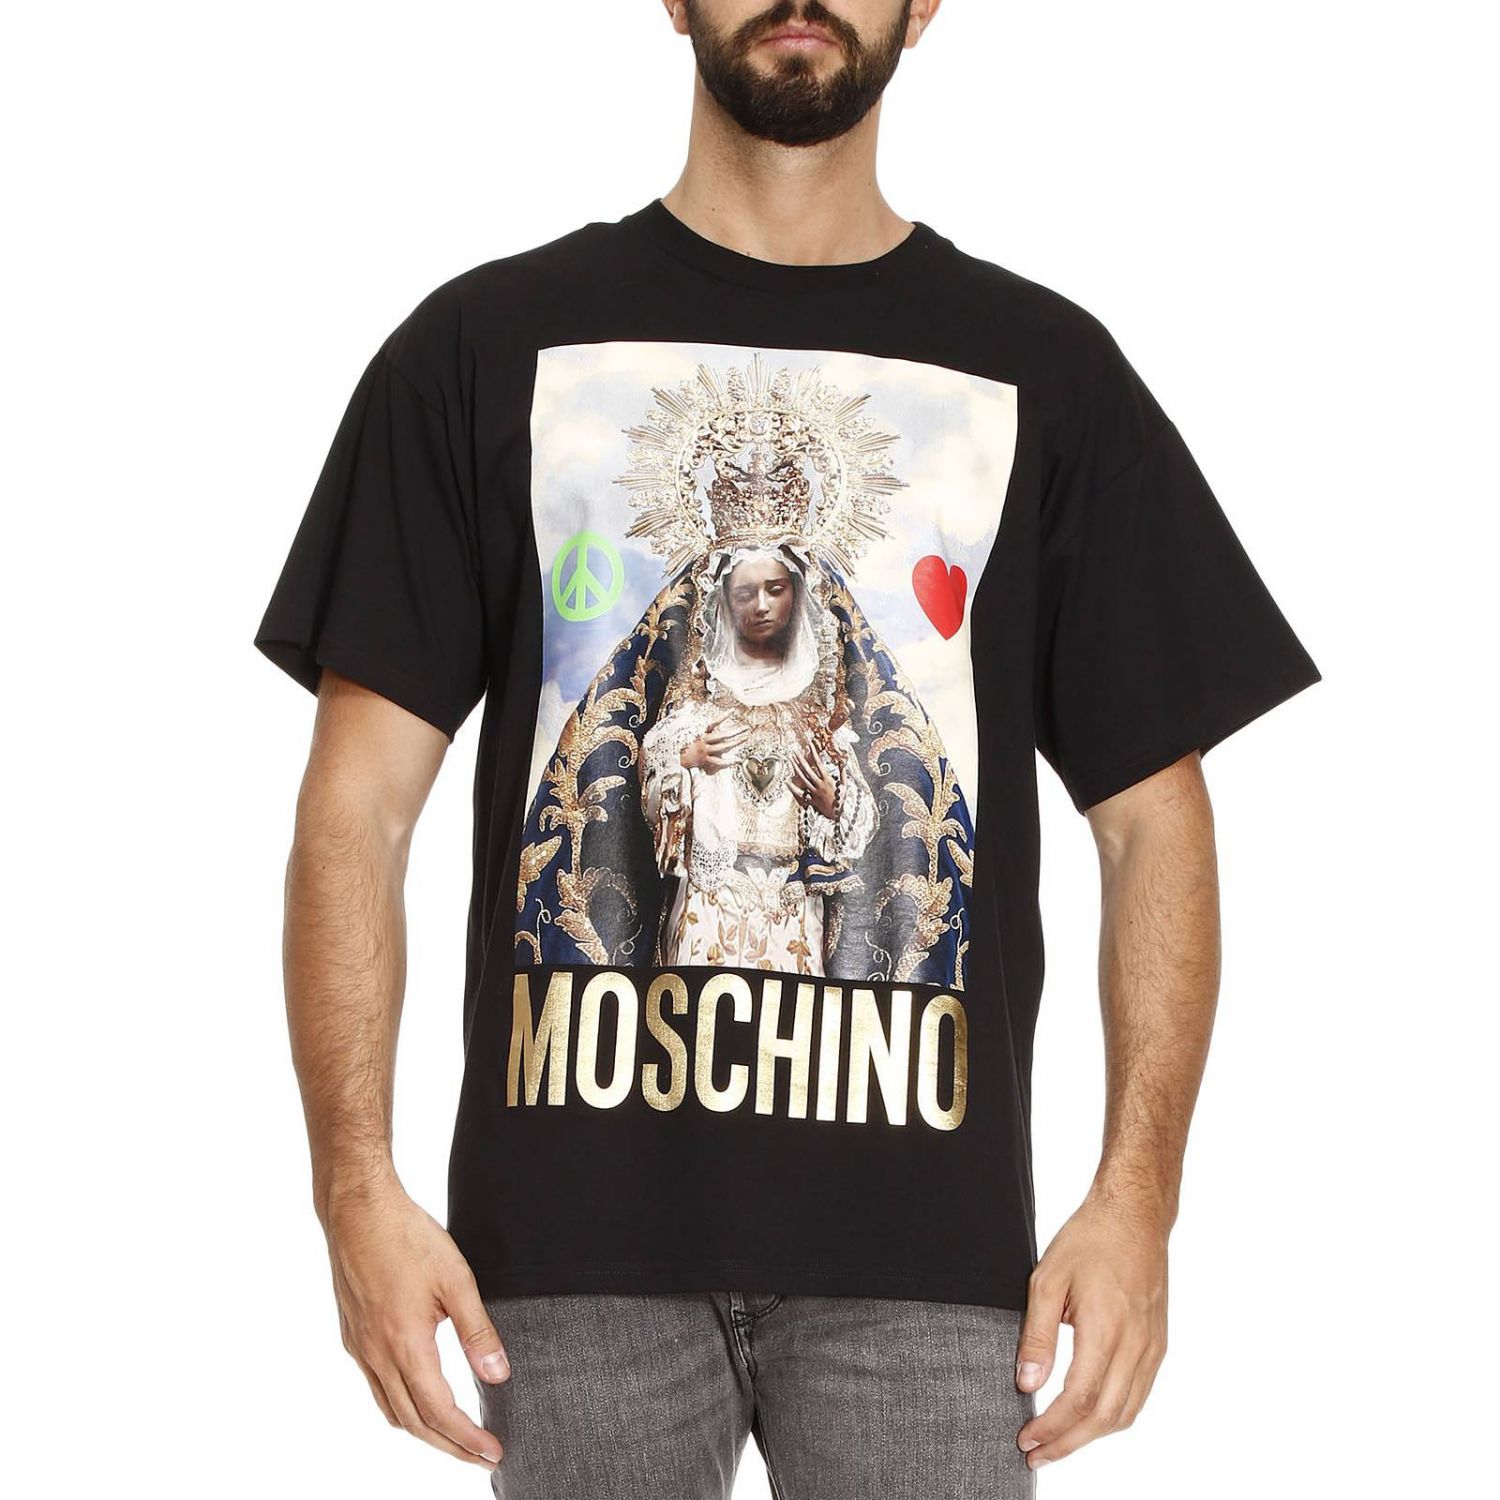 Moschino Couture Outlet: T-shirt men | T-Shirt Moschino Couture Men